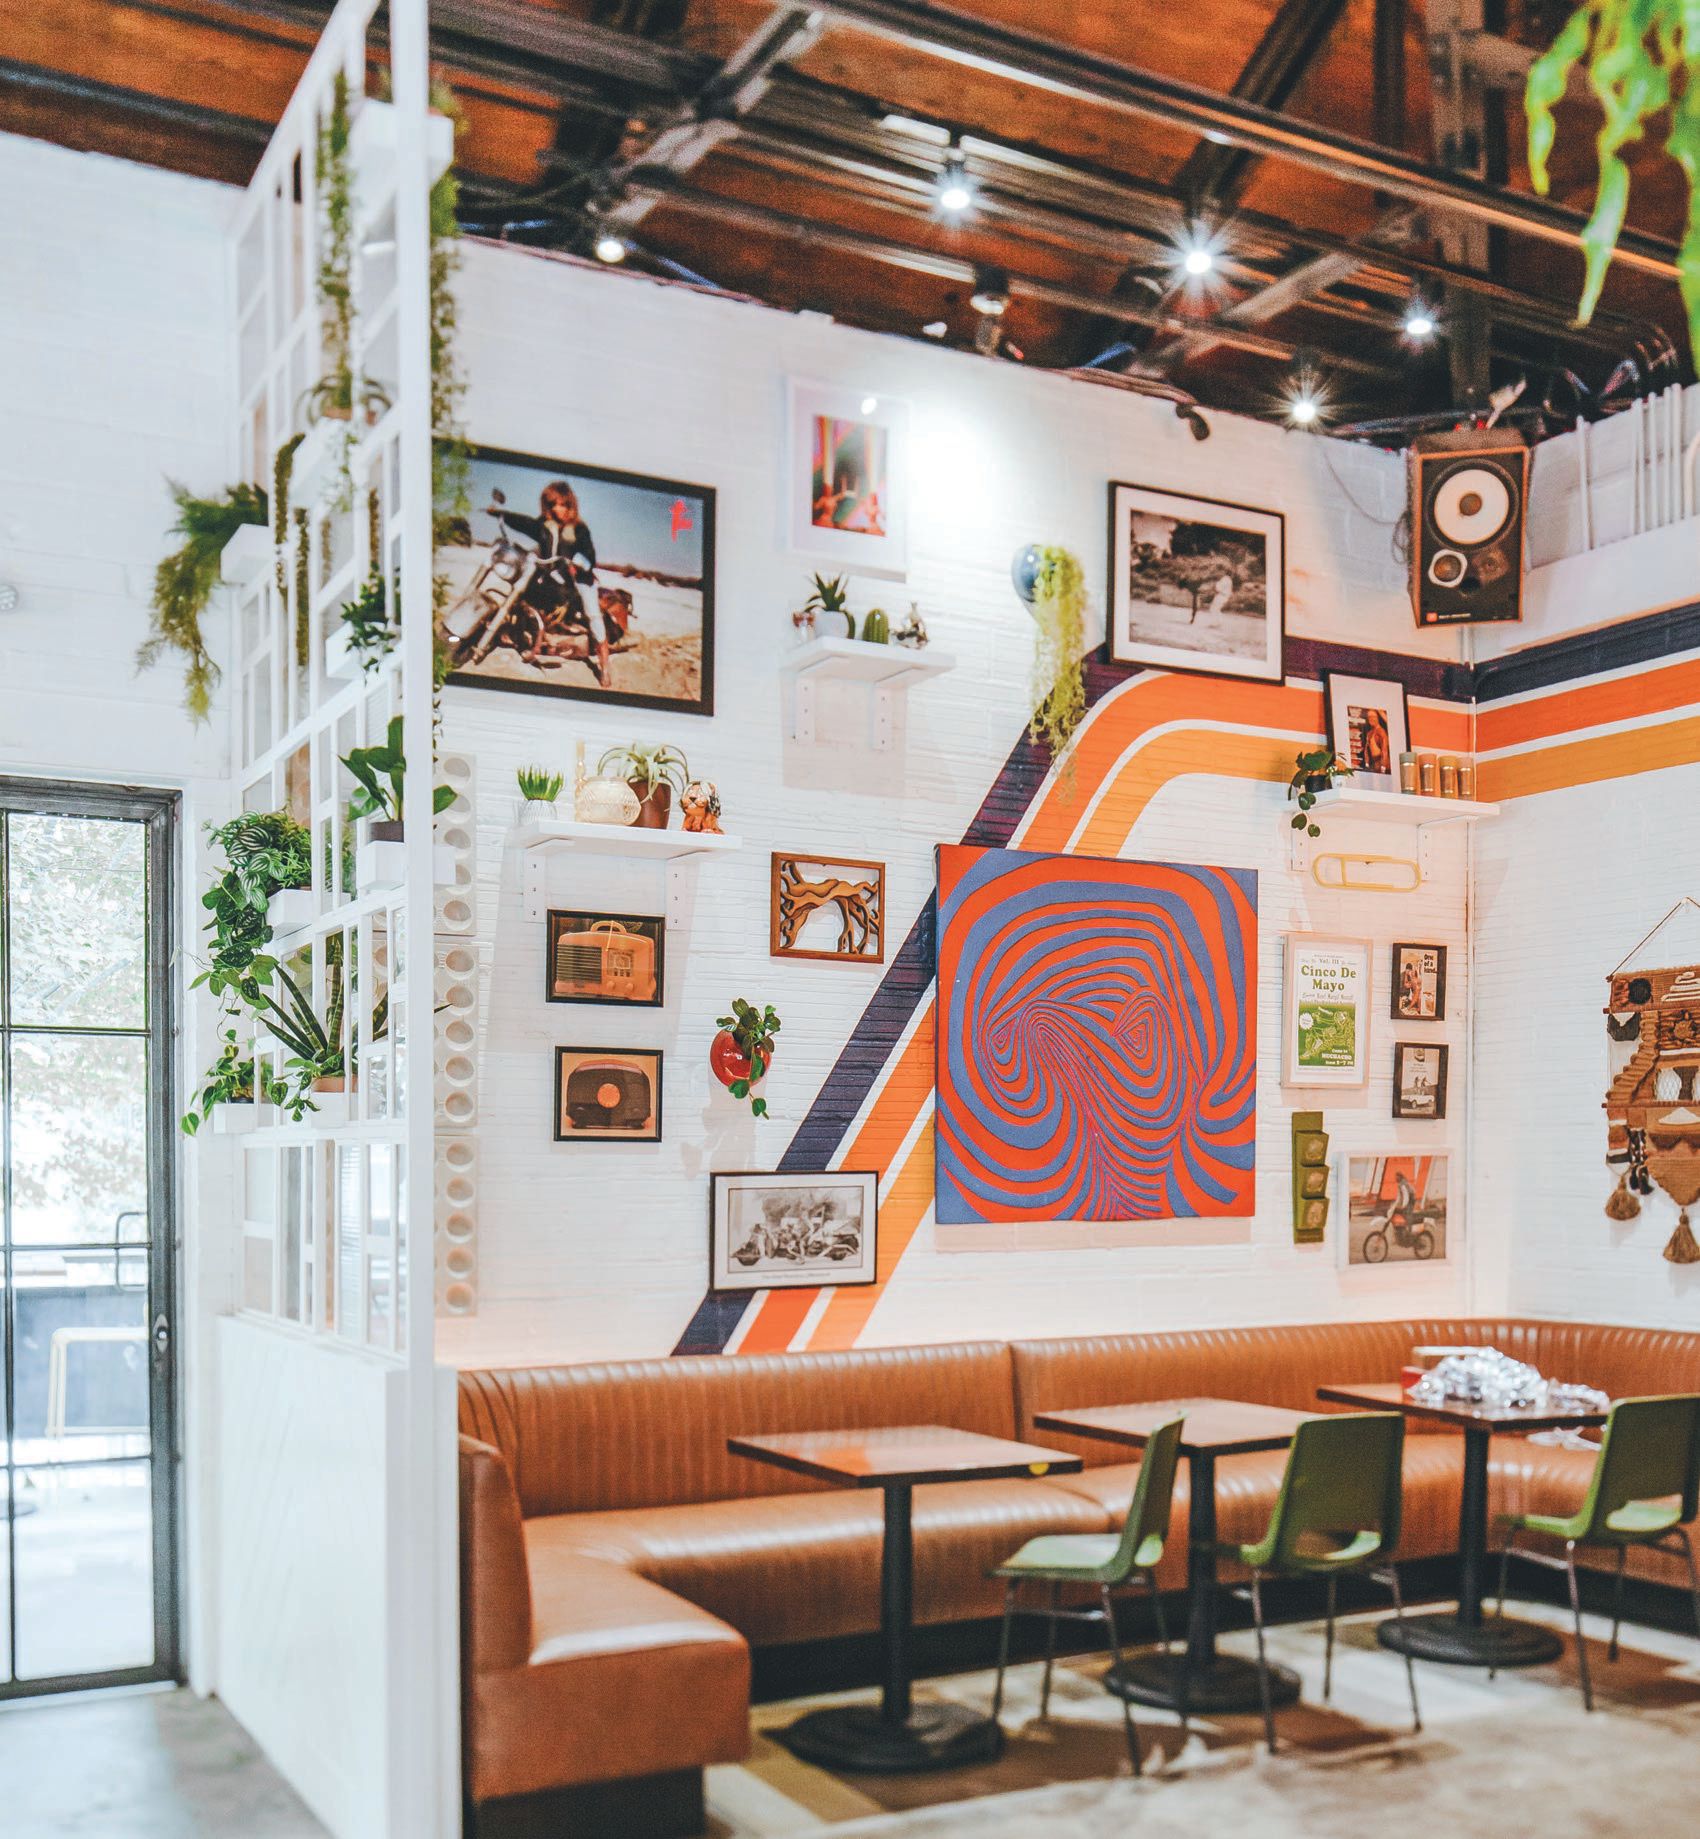 Classic Muchacho stripes and other groovy ’70s motifs adorn the space. PHOTO BY GABRIELLA LEPAGE